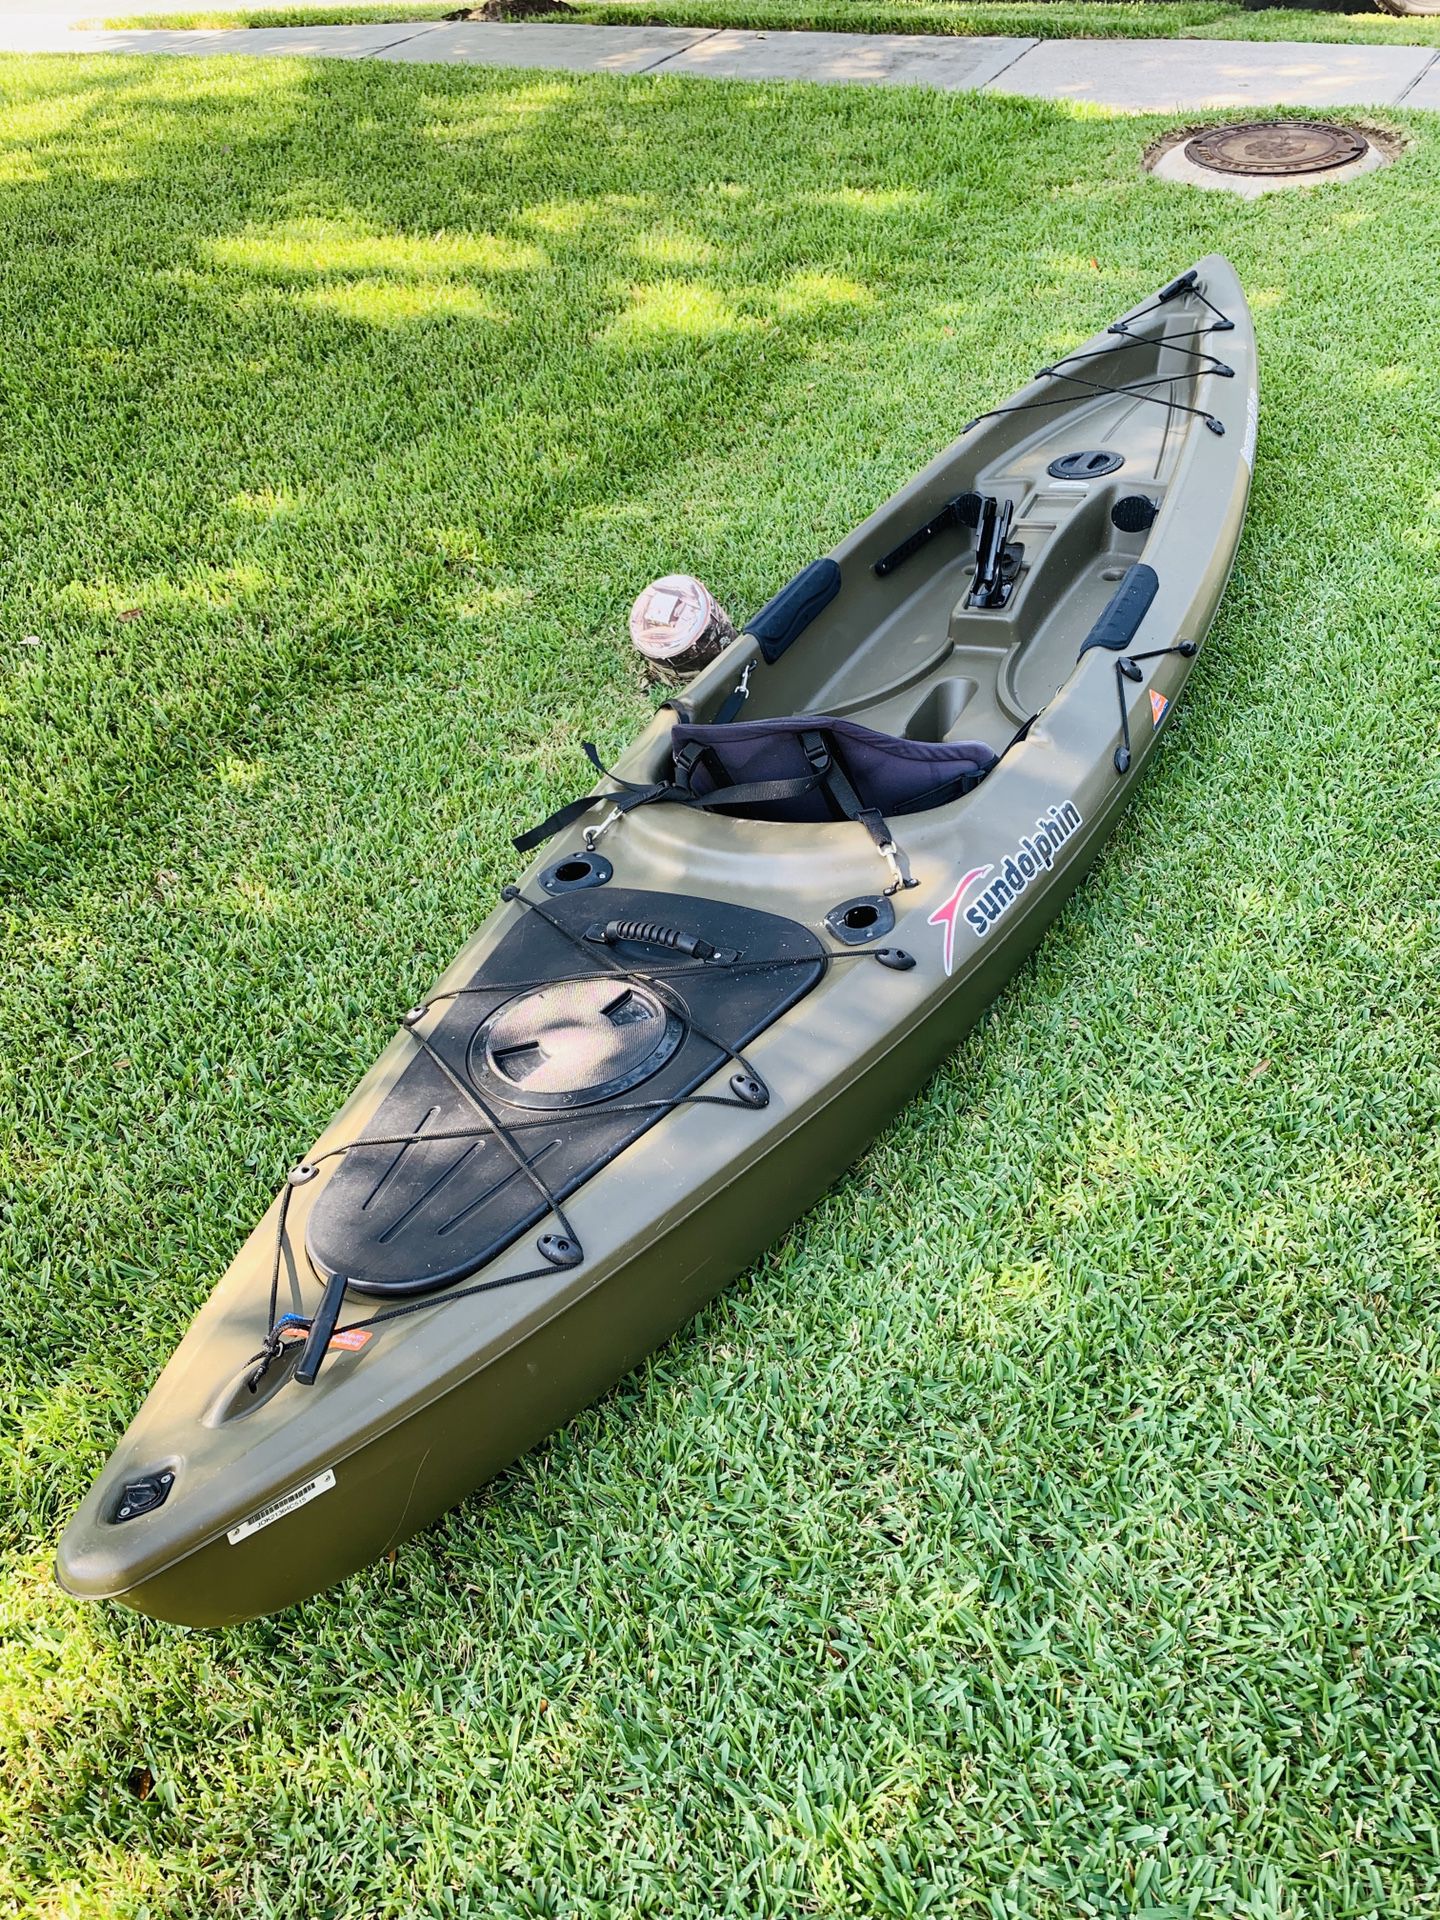 Sundolphin journey 12 SS, comes with a $100 paddle.